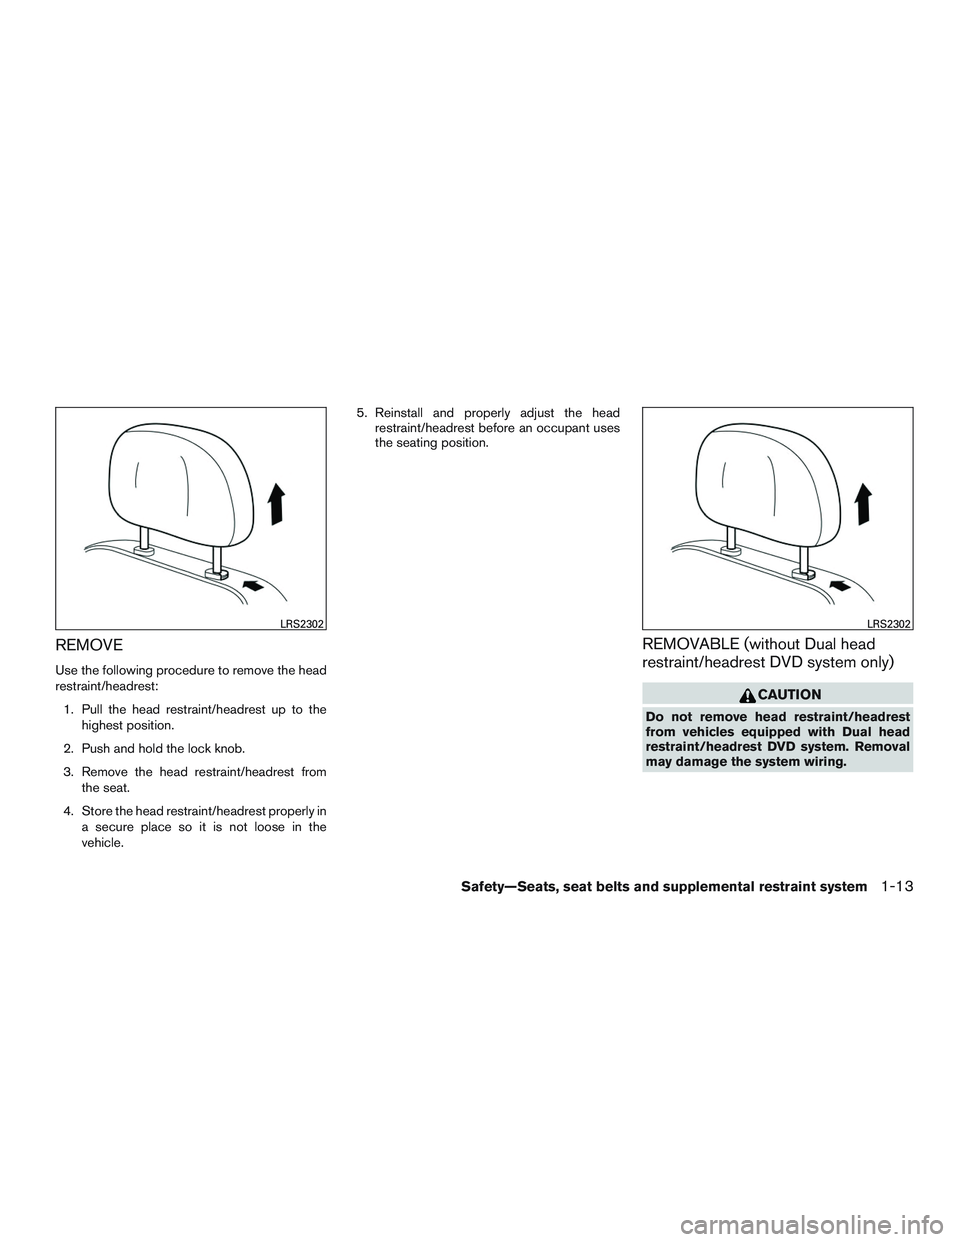 INFINITI QX60 2015  Owners Manual REMOVE
Use the following procedure to remove the head
restraint/headrest:1. Pull the head restraint/headrest up to the highest position.
2. Push and hold the lock knob.
3. Remove the head restraint/he